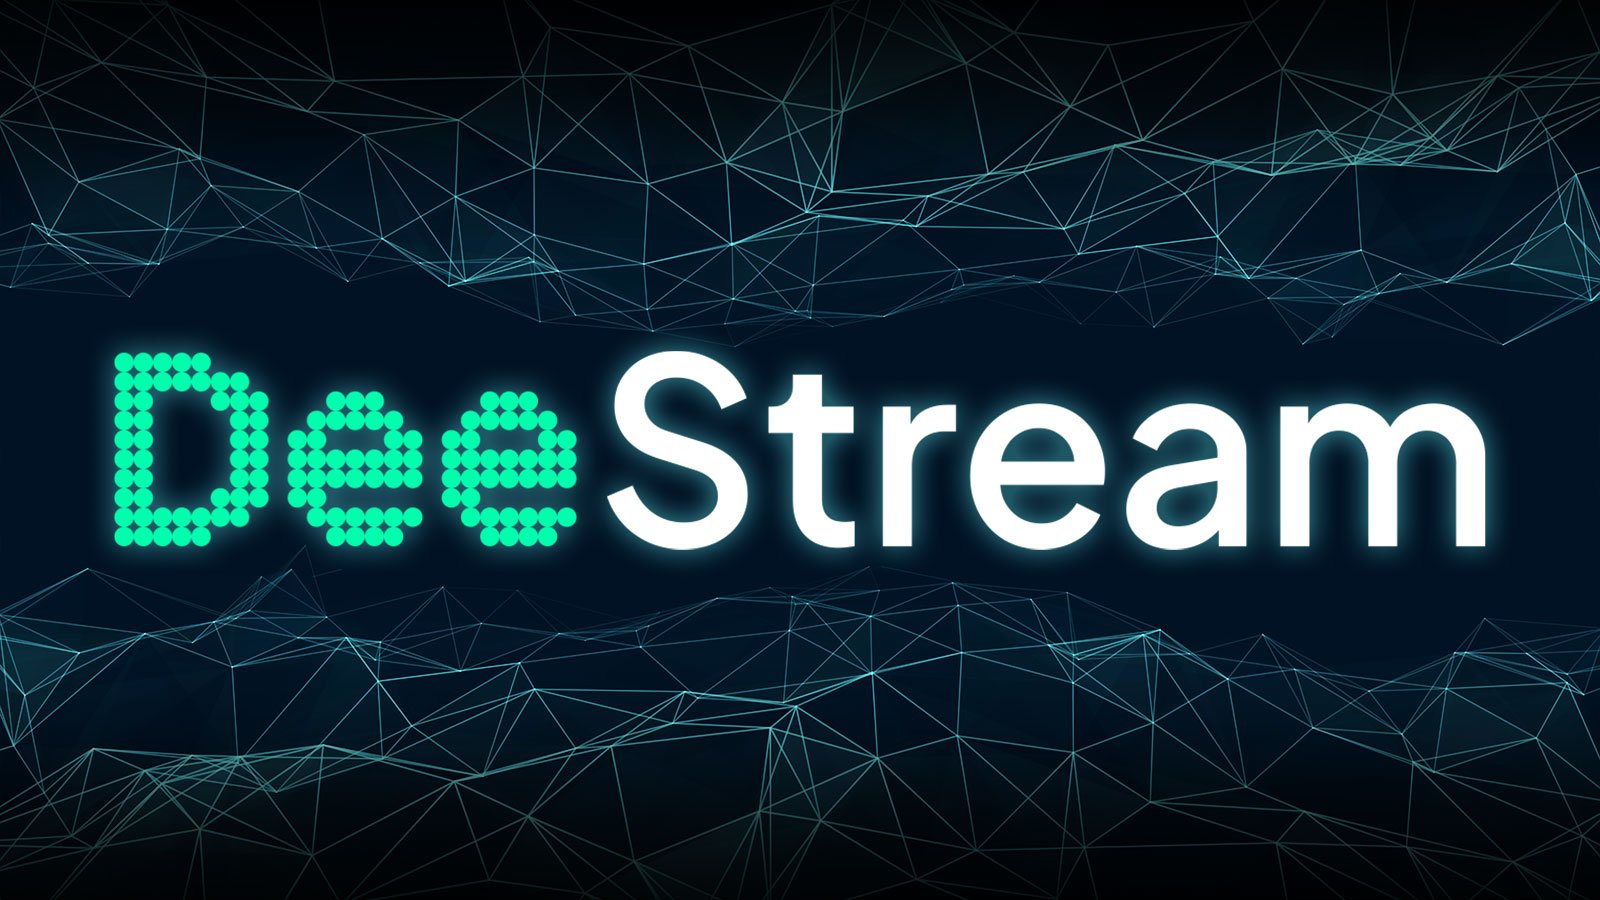 Deestream (DST) Tokensale Gains Attention in Q1 as Tron (TRX), Polkadot (DOT) Top Altcoins Recover Fast